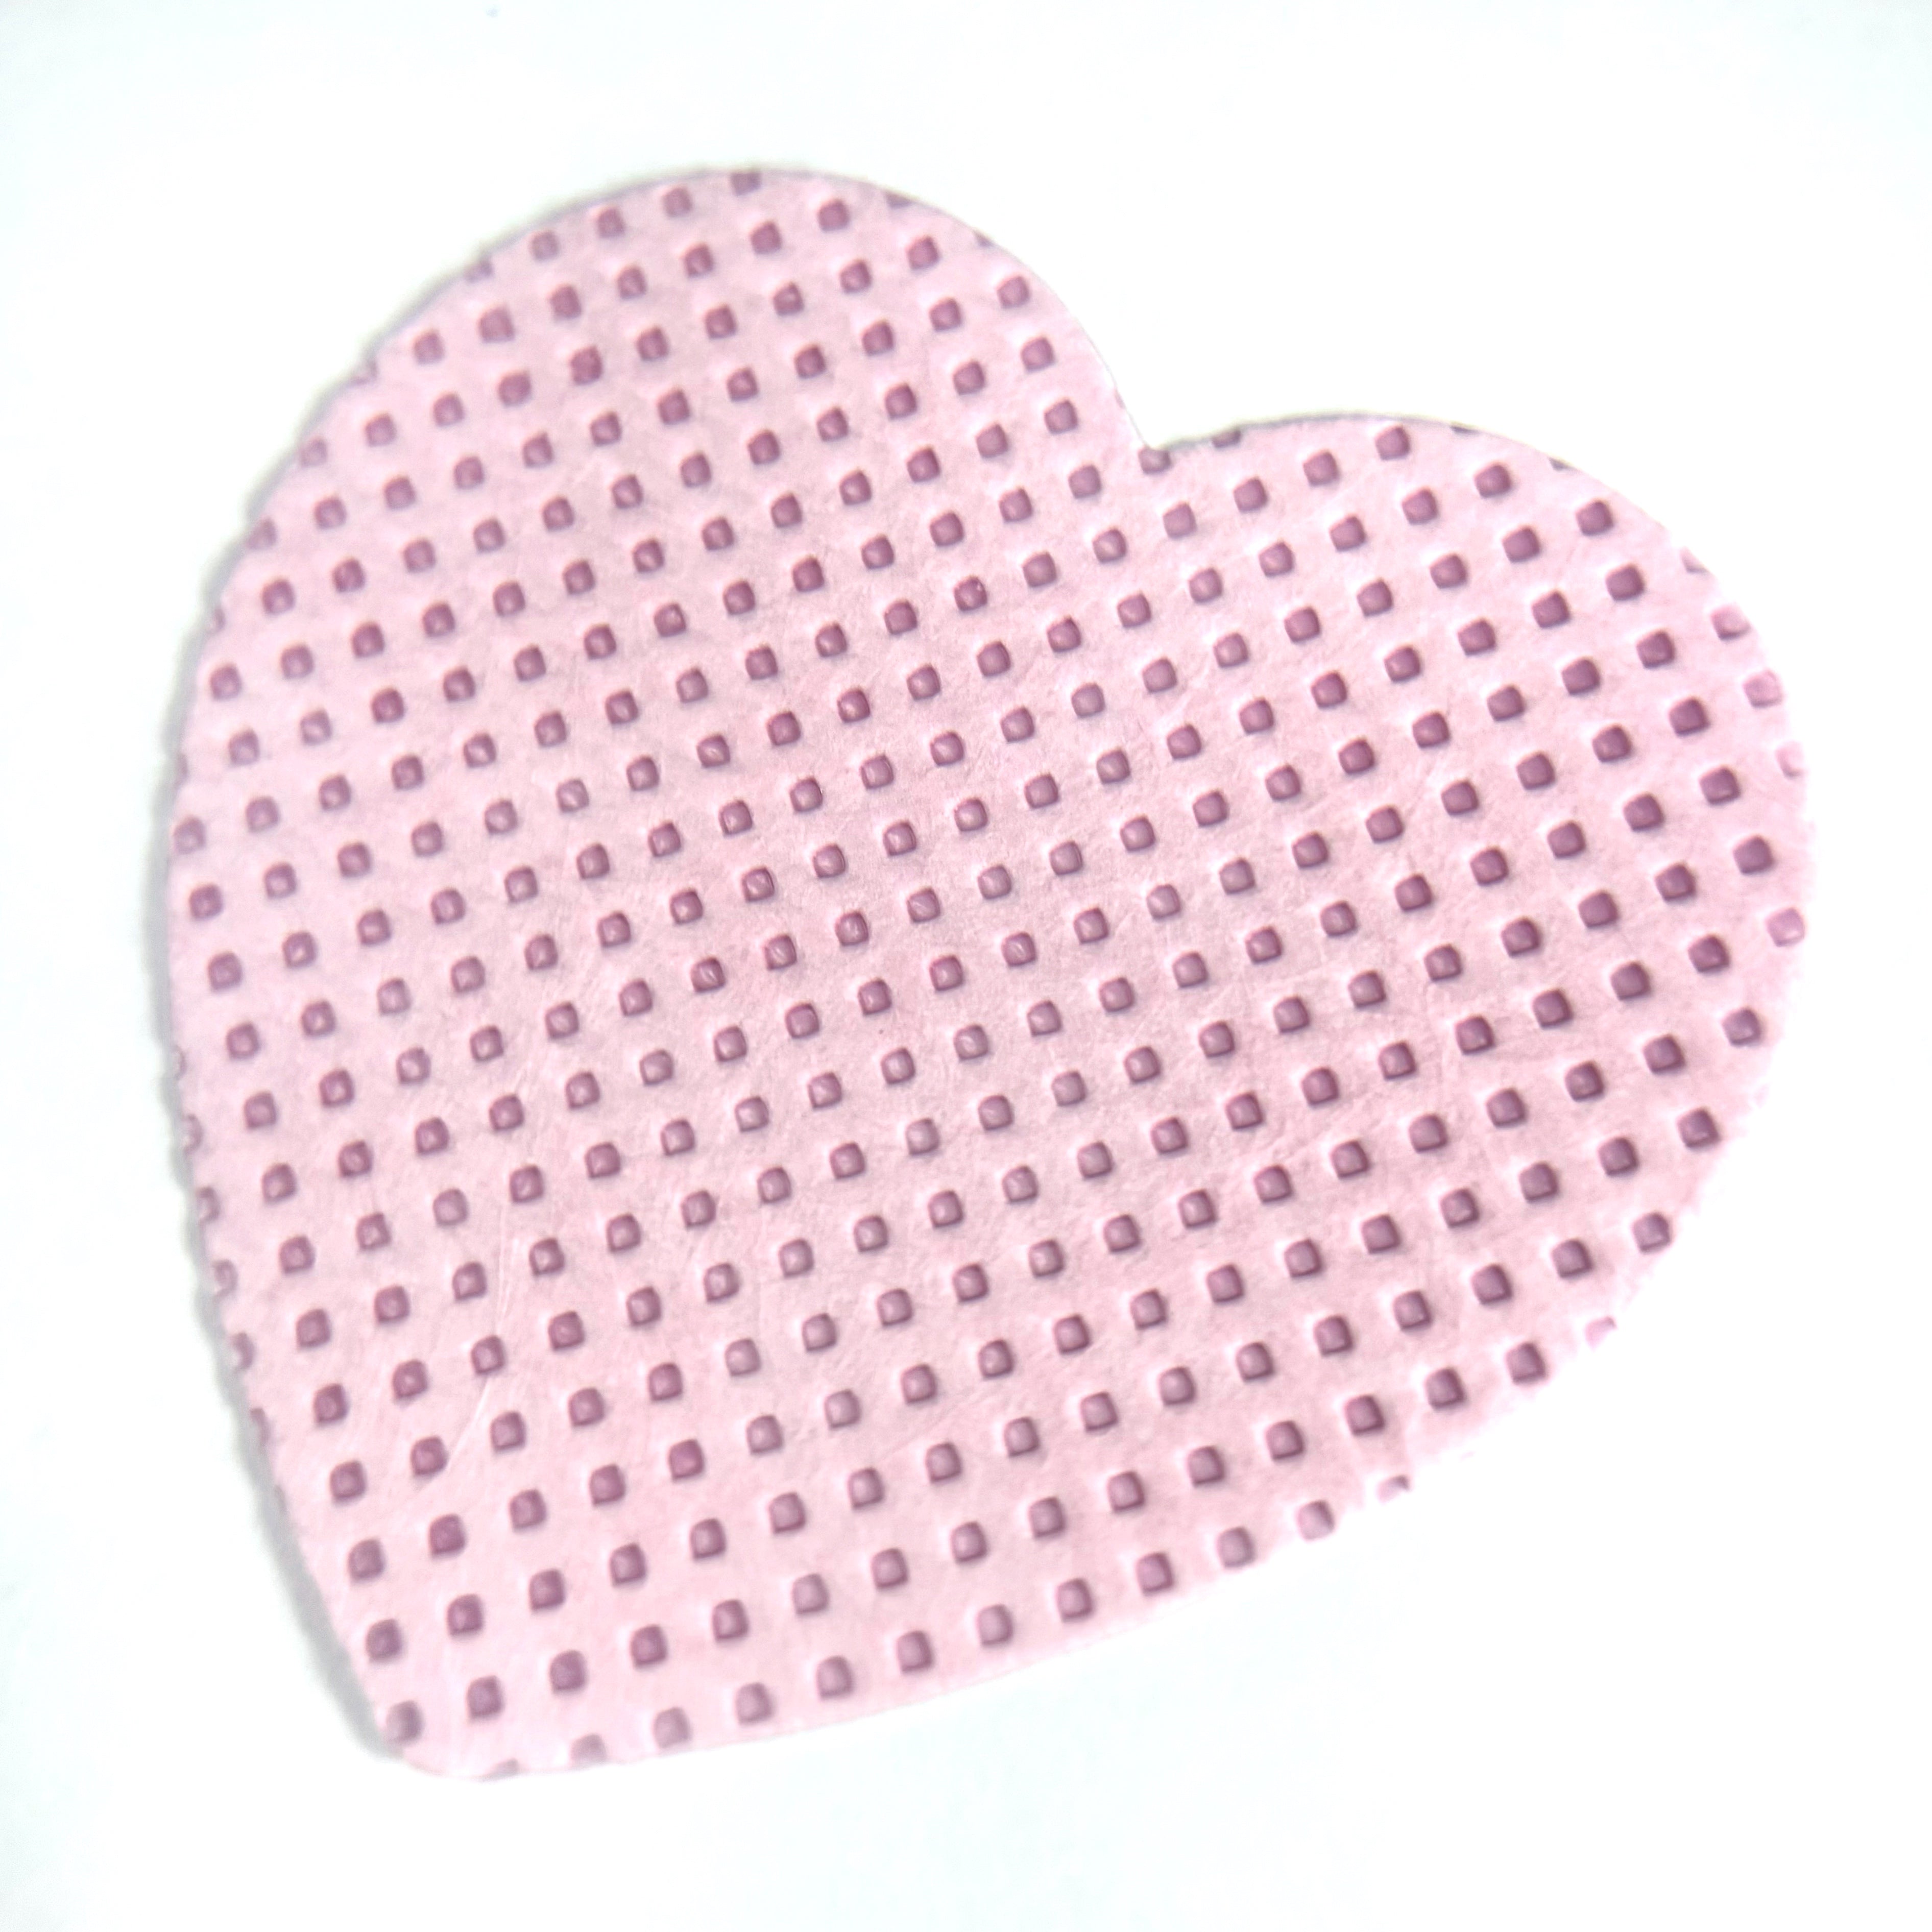 FLUFF FREE WIPES - PINK HEART